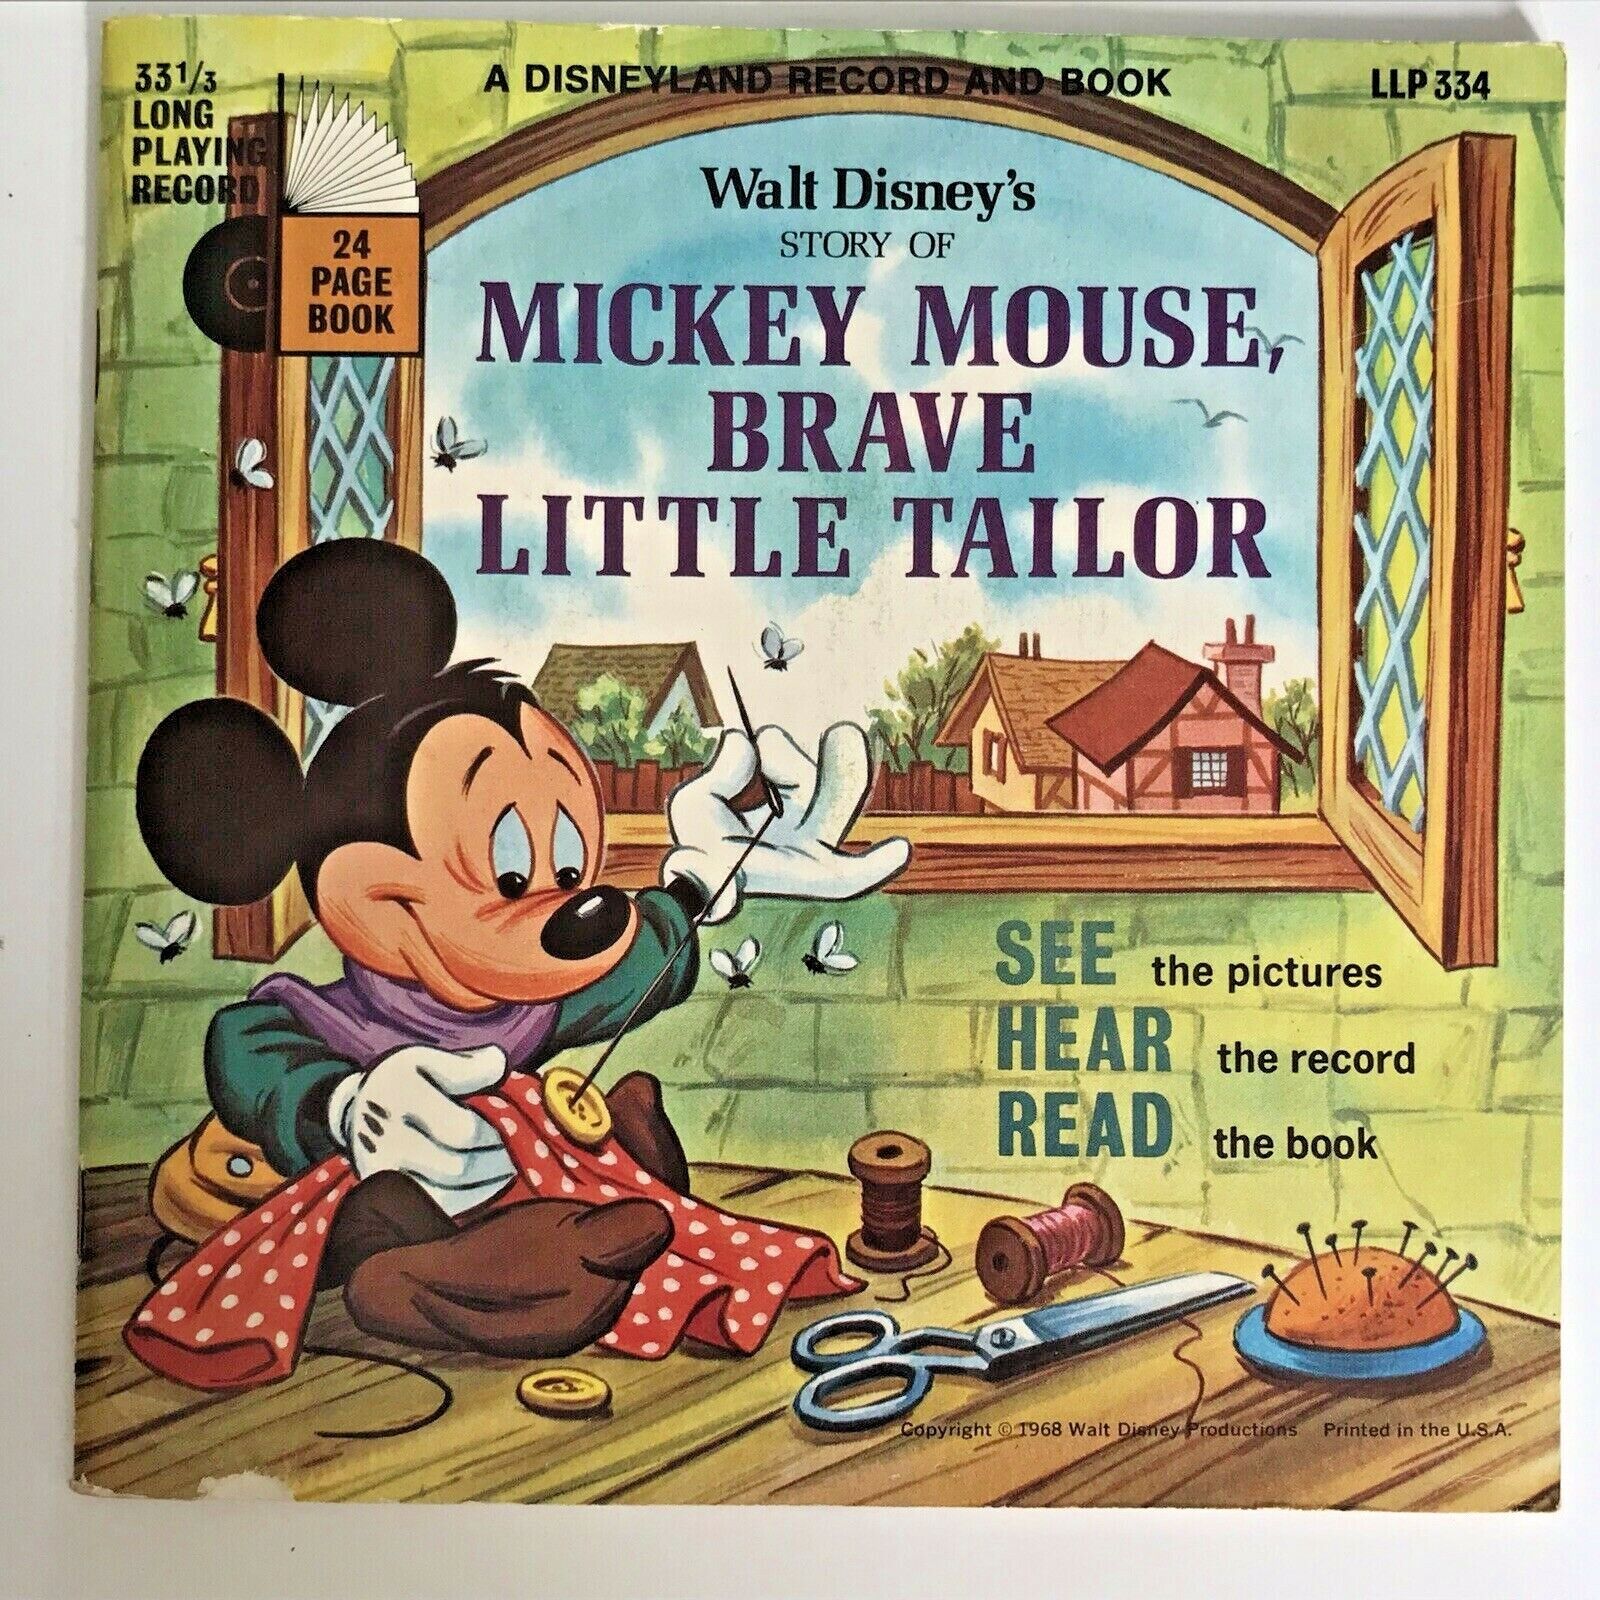 Vintage 1968 MICKEY MOUSE,BRAVE LITTLE TAILOR Disneyland Record and Book Rare 